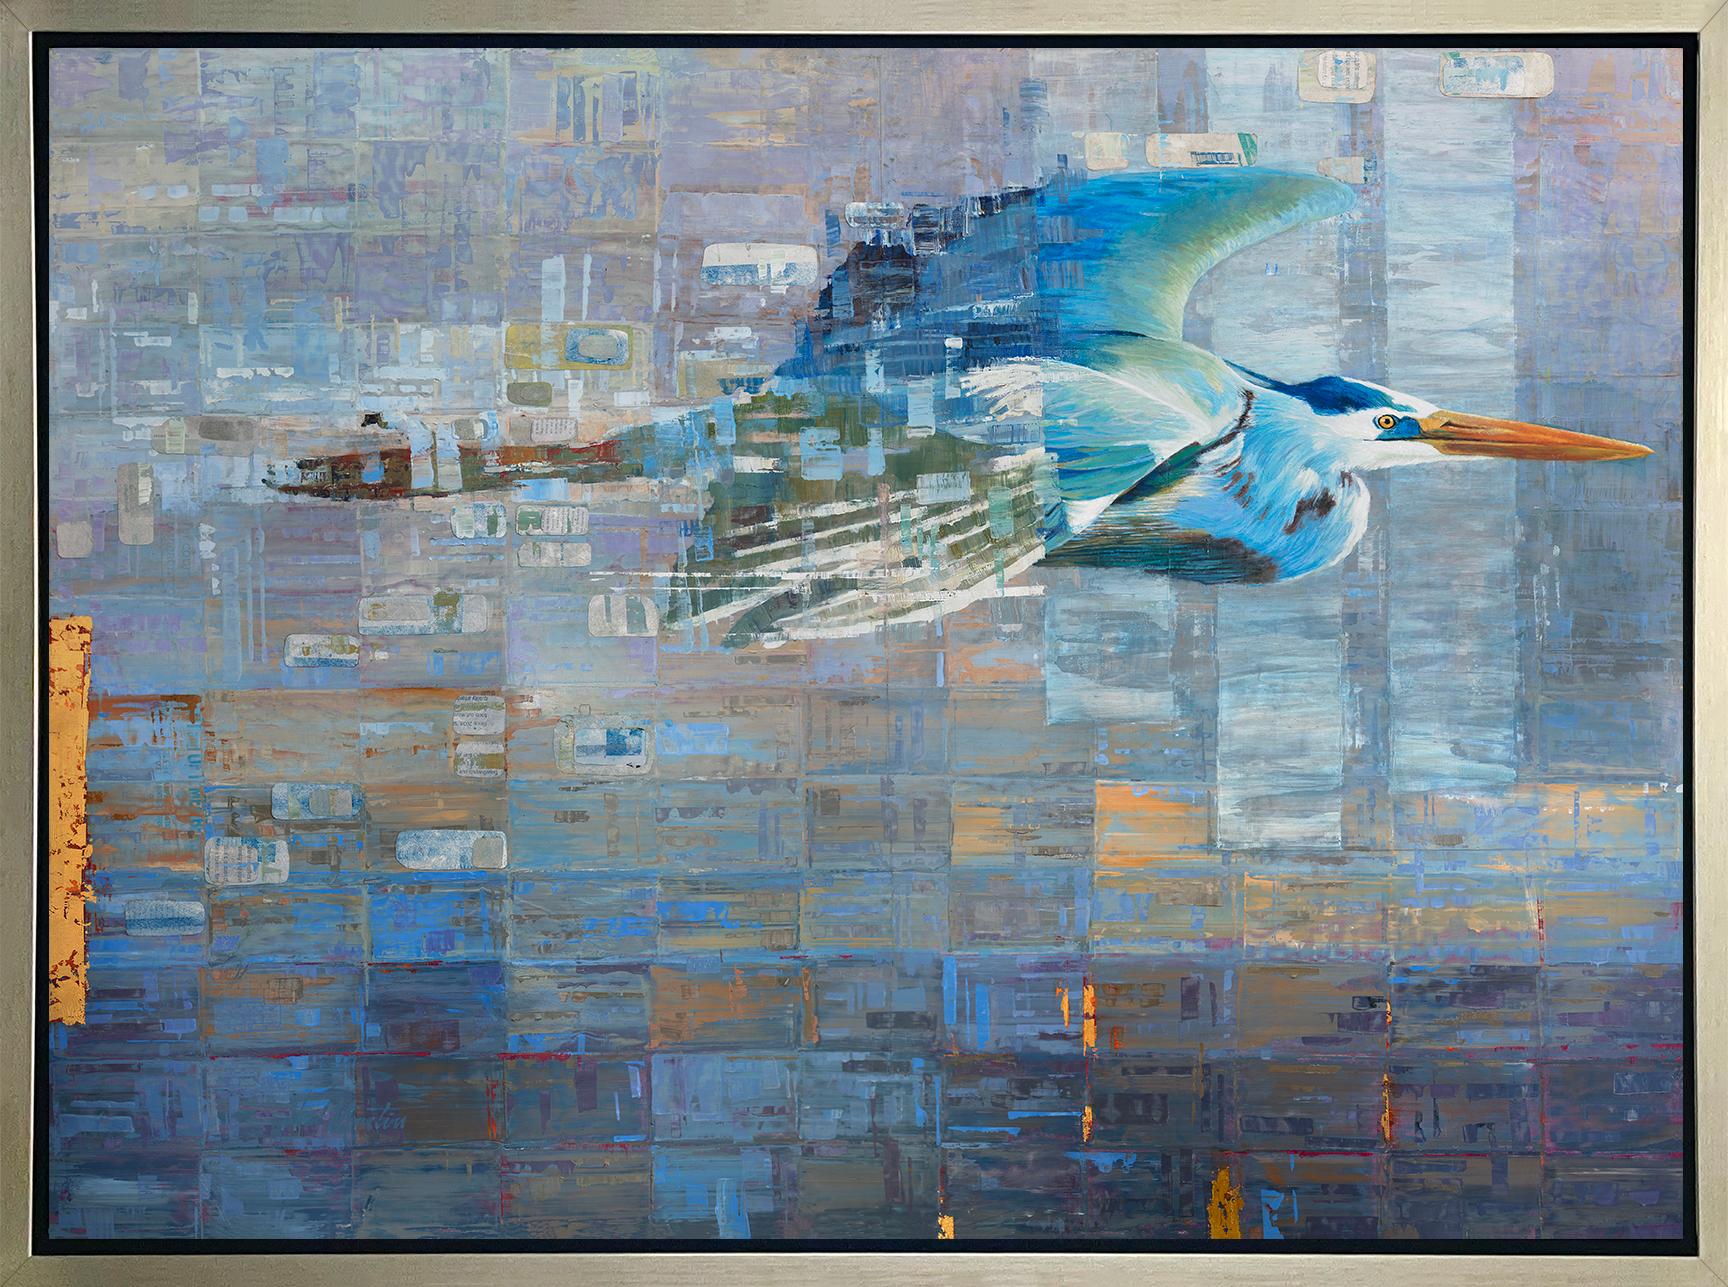 Ned Martin Landscape Print - "Blue Heron in Flight, " Limited Edition Giclee Print, 45" x 60"